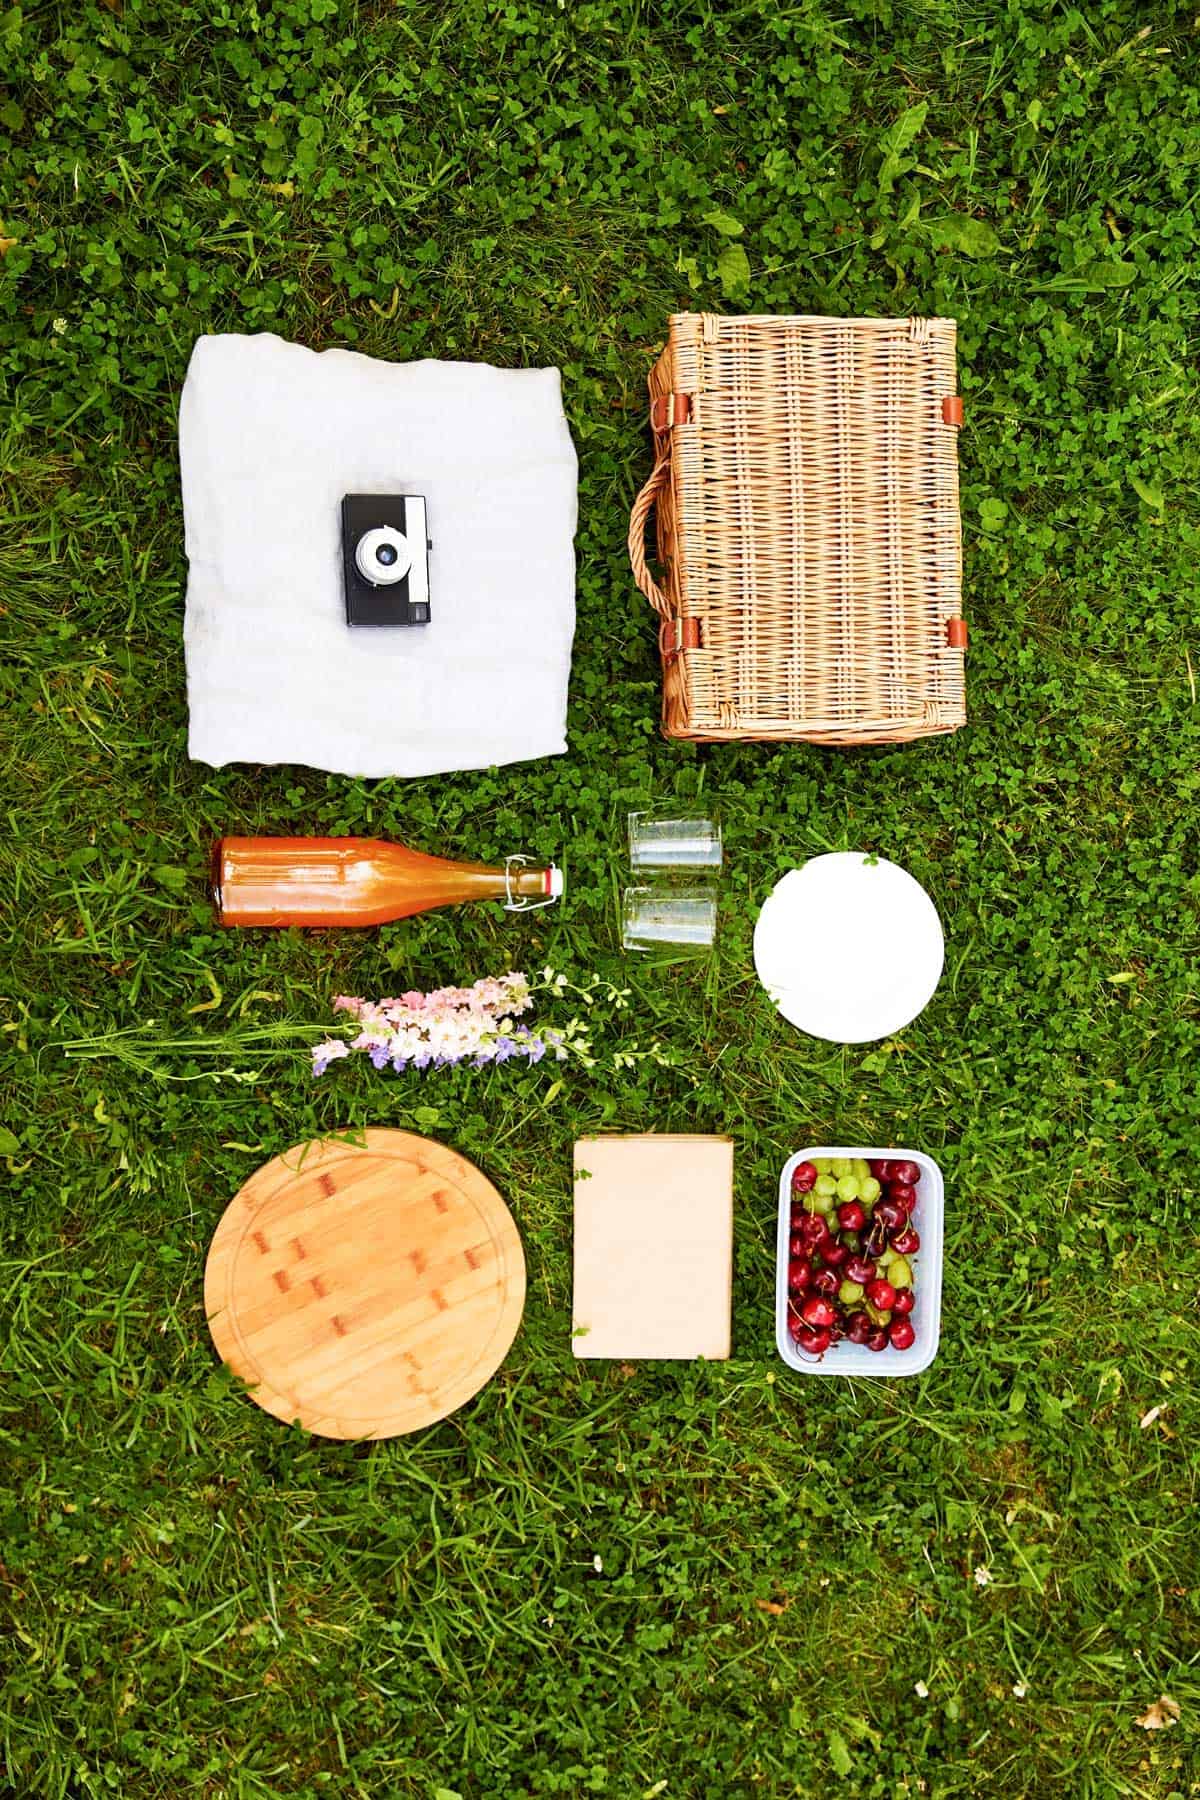 A picnic setup on grass with a wicker basket, white cloth, two glasses, a wooden tray, a bottle of drink, a container of grapes and cherries, purple flowers, and a small square of cheese.